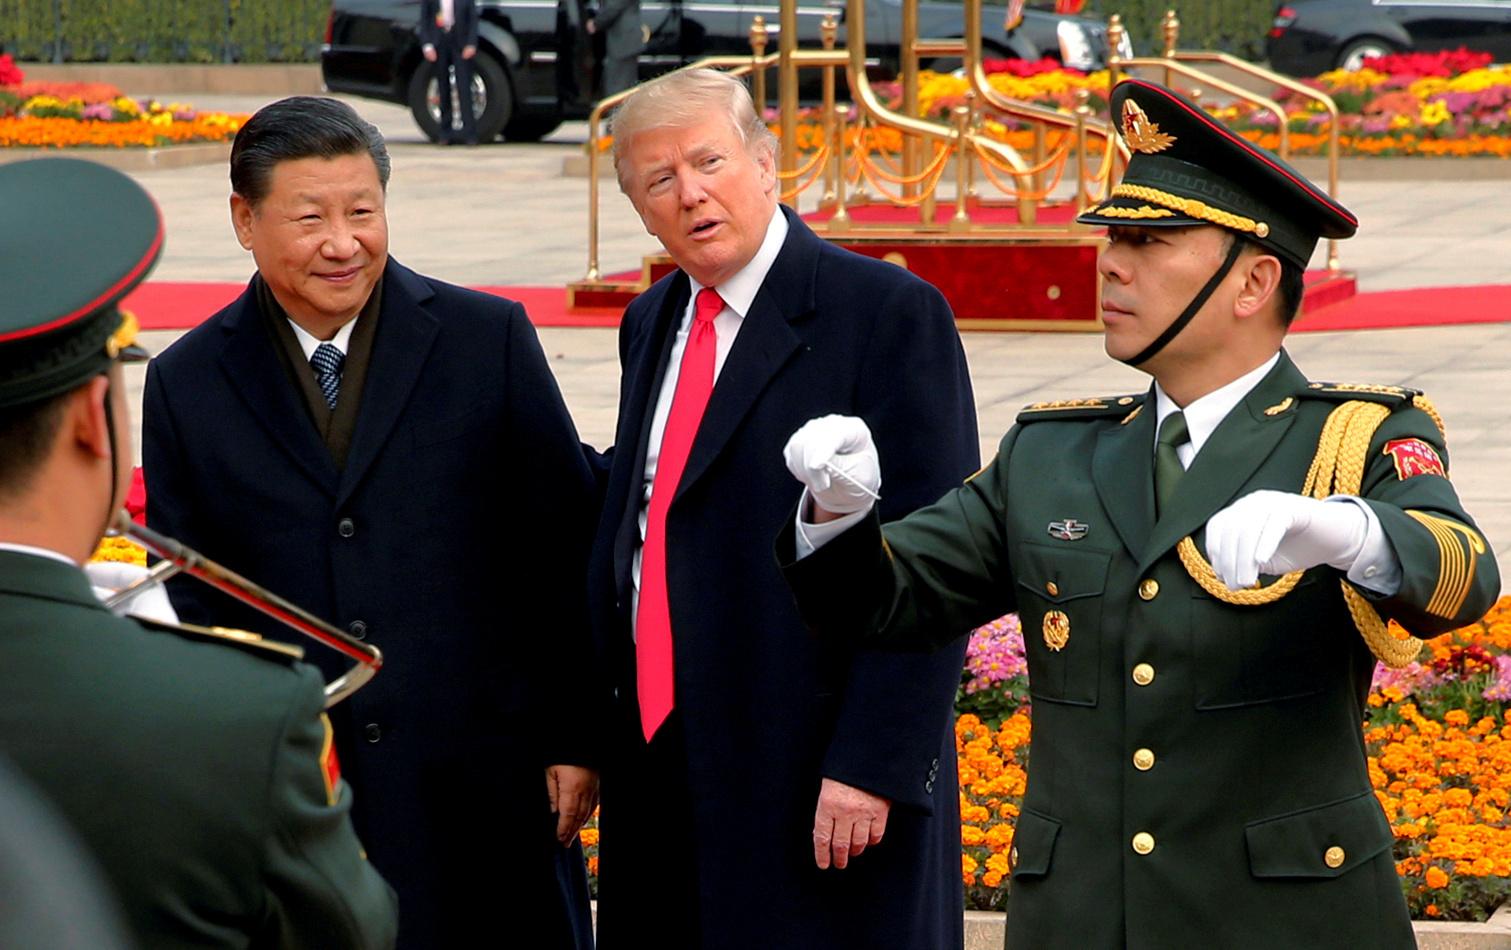 U.S. President Donald Trump takes part in a welcoming ceremony with China's President Xi Jinping in Beijing, China, November 9, 2017.